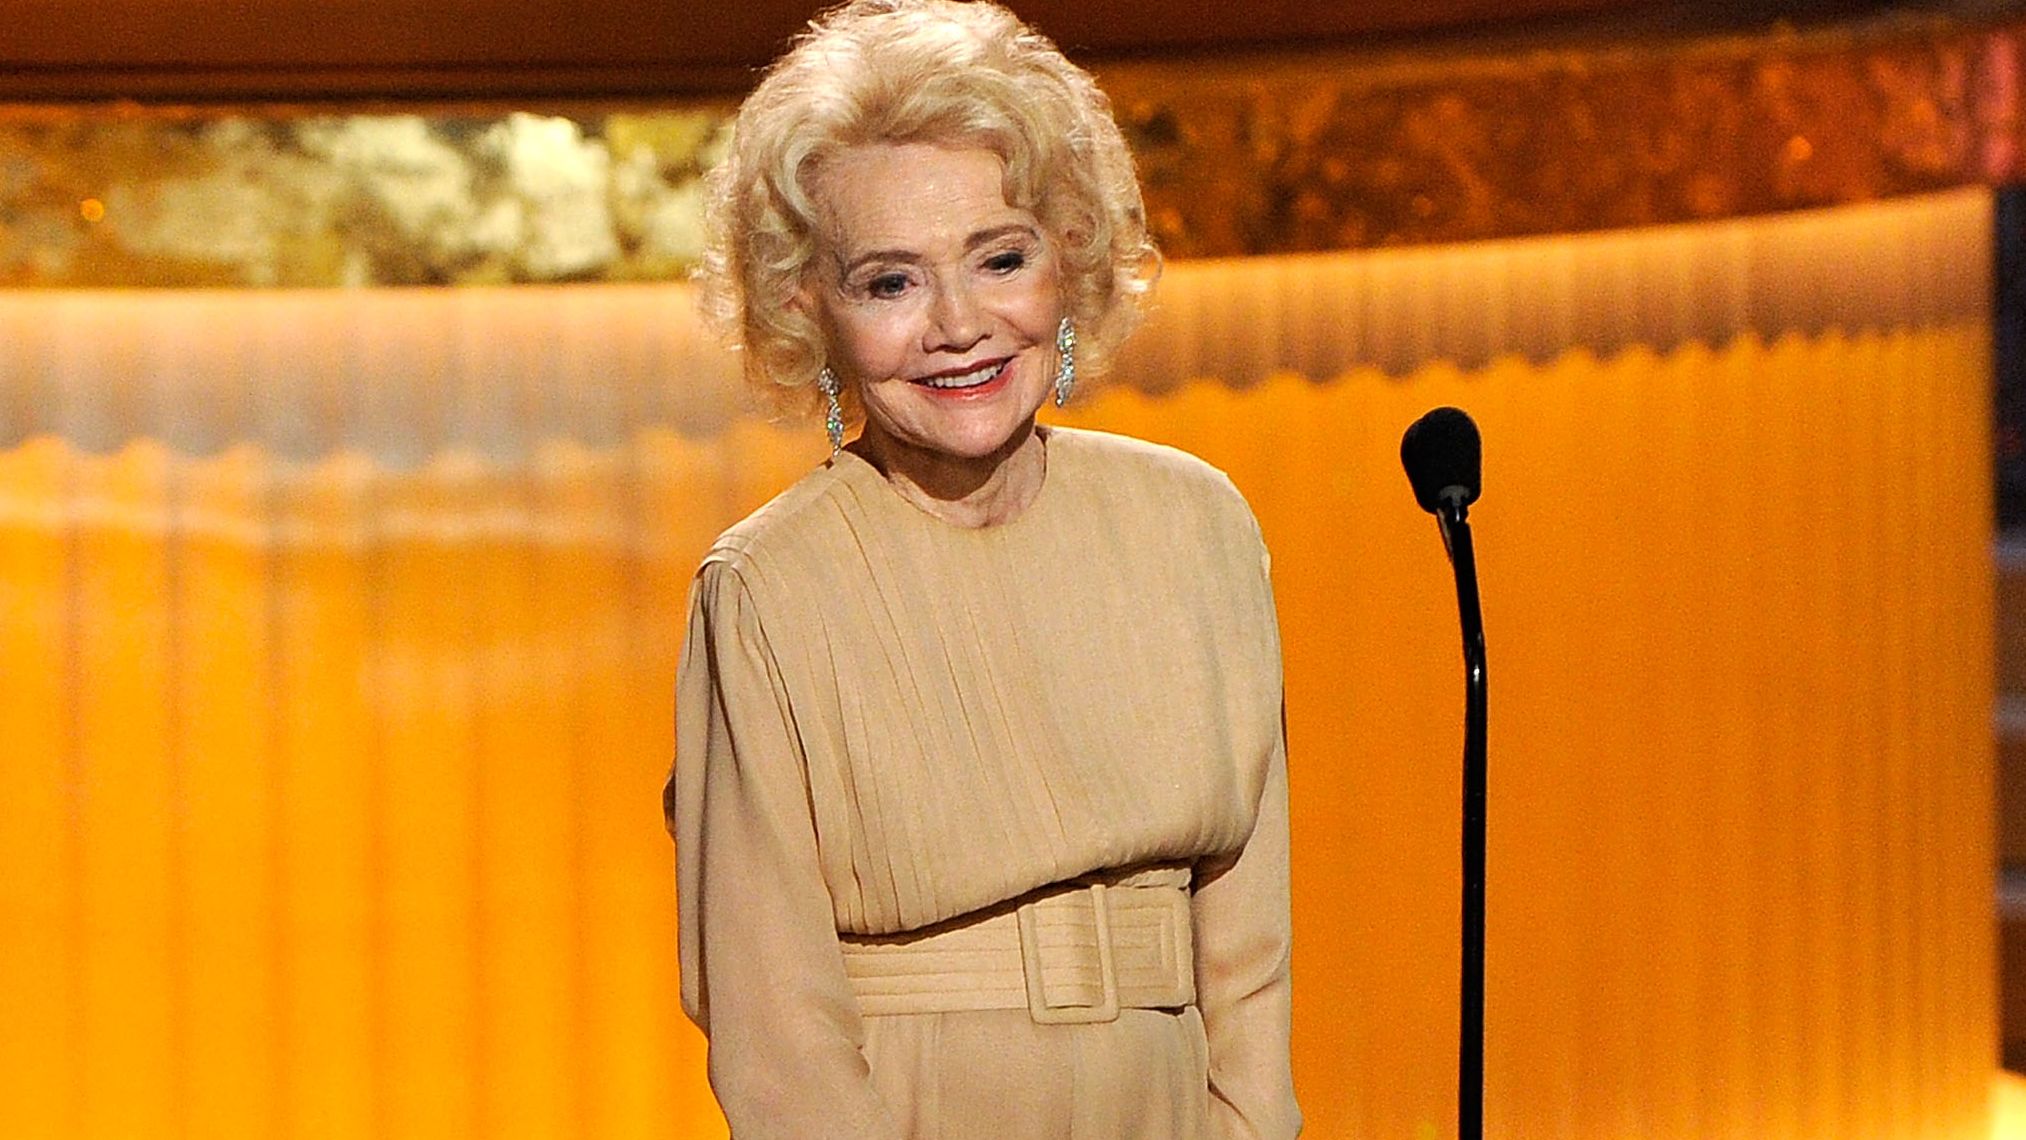  Actress Agnes Nixon speaks onstage at the 37th Annual Daytime Entertainment Emmy Awards held at the Las Vegas Hilton on June 27, 2010 in Las Vegas, Nevada.  (Photo by Ethan Miller/Getty Images) 